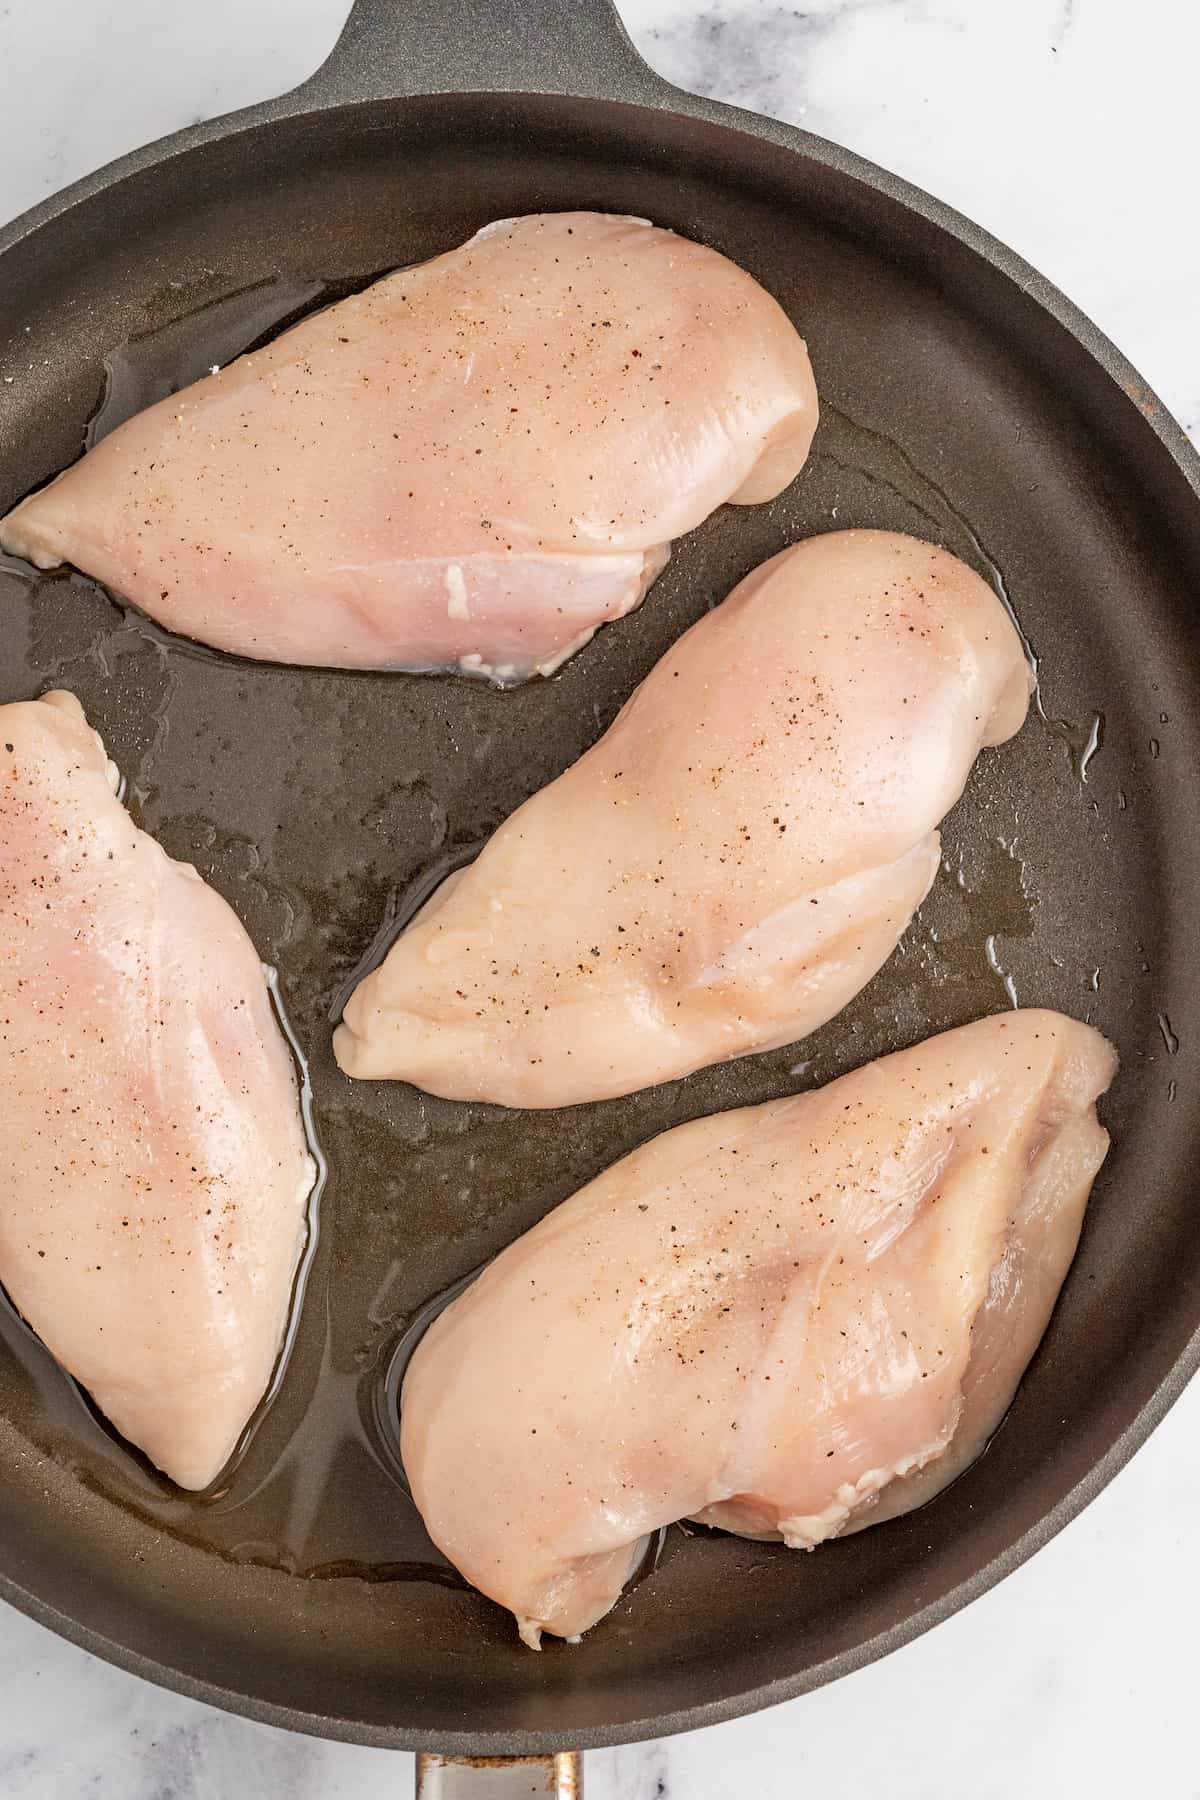 Placing the chicken in the pan.